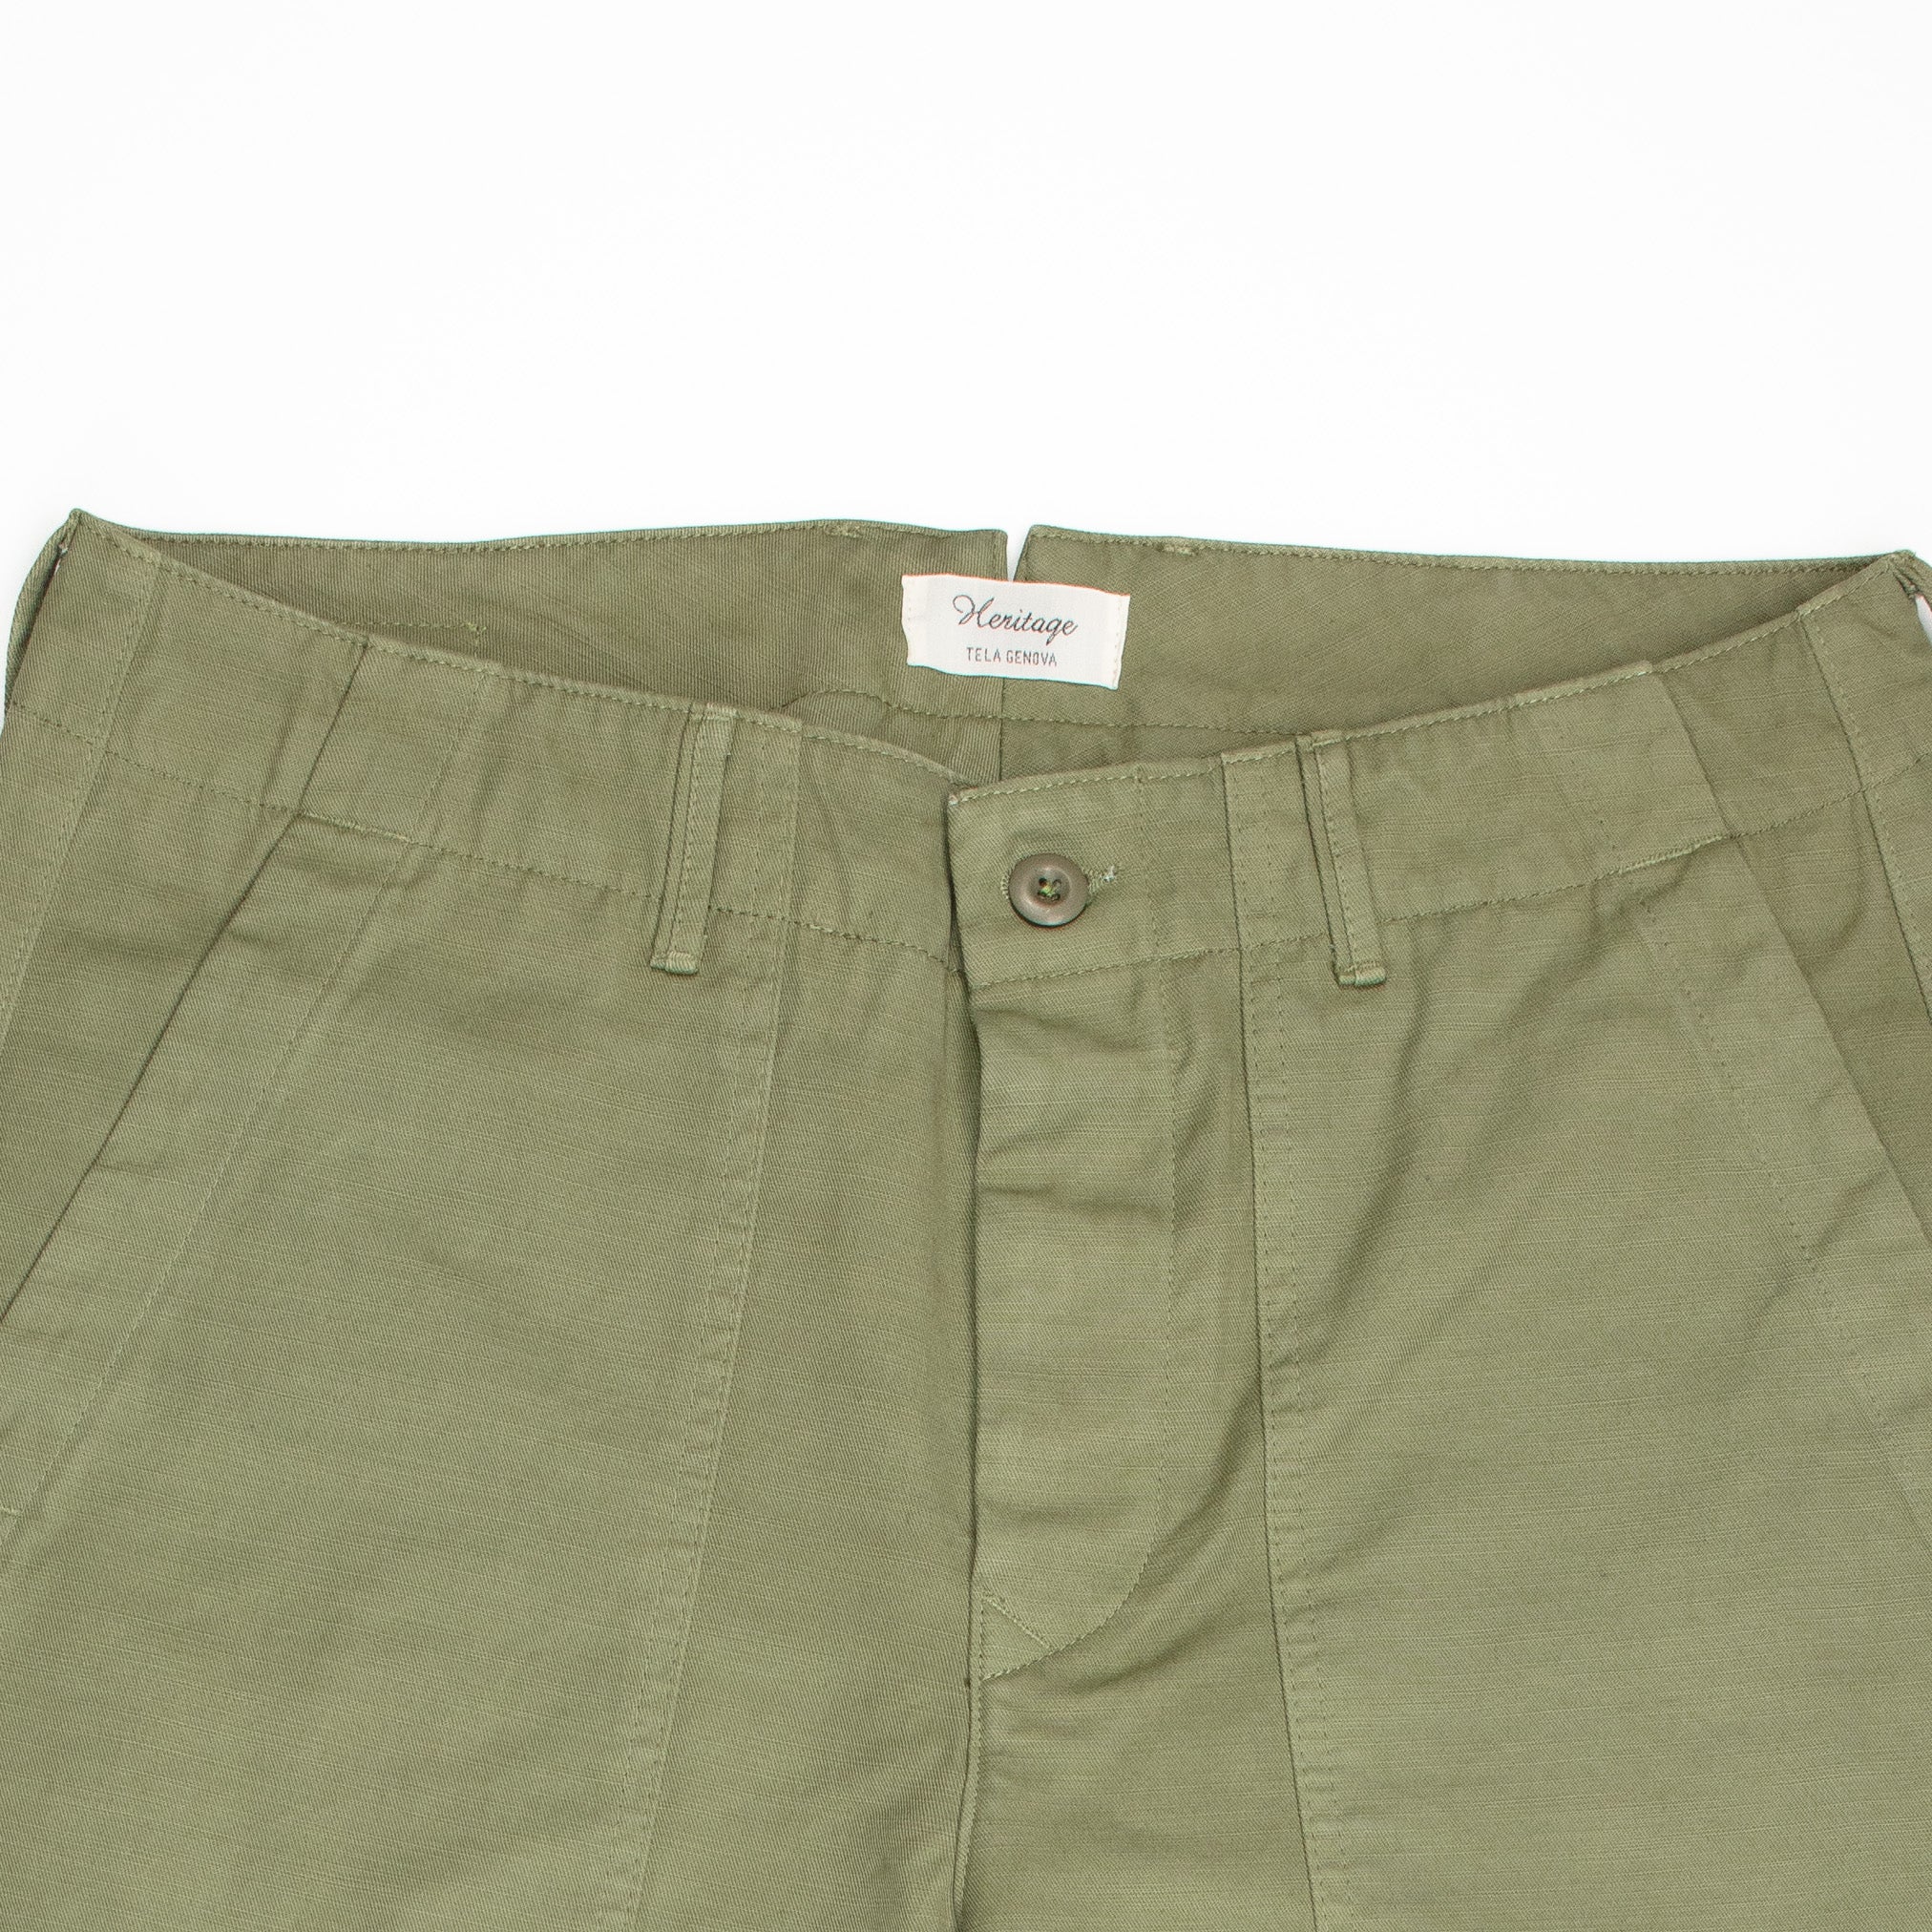 Arolfo Chinos in Military Green